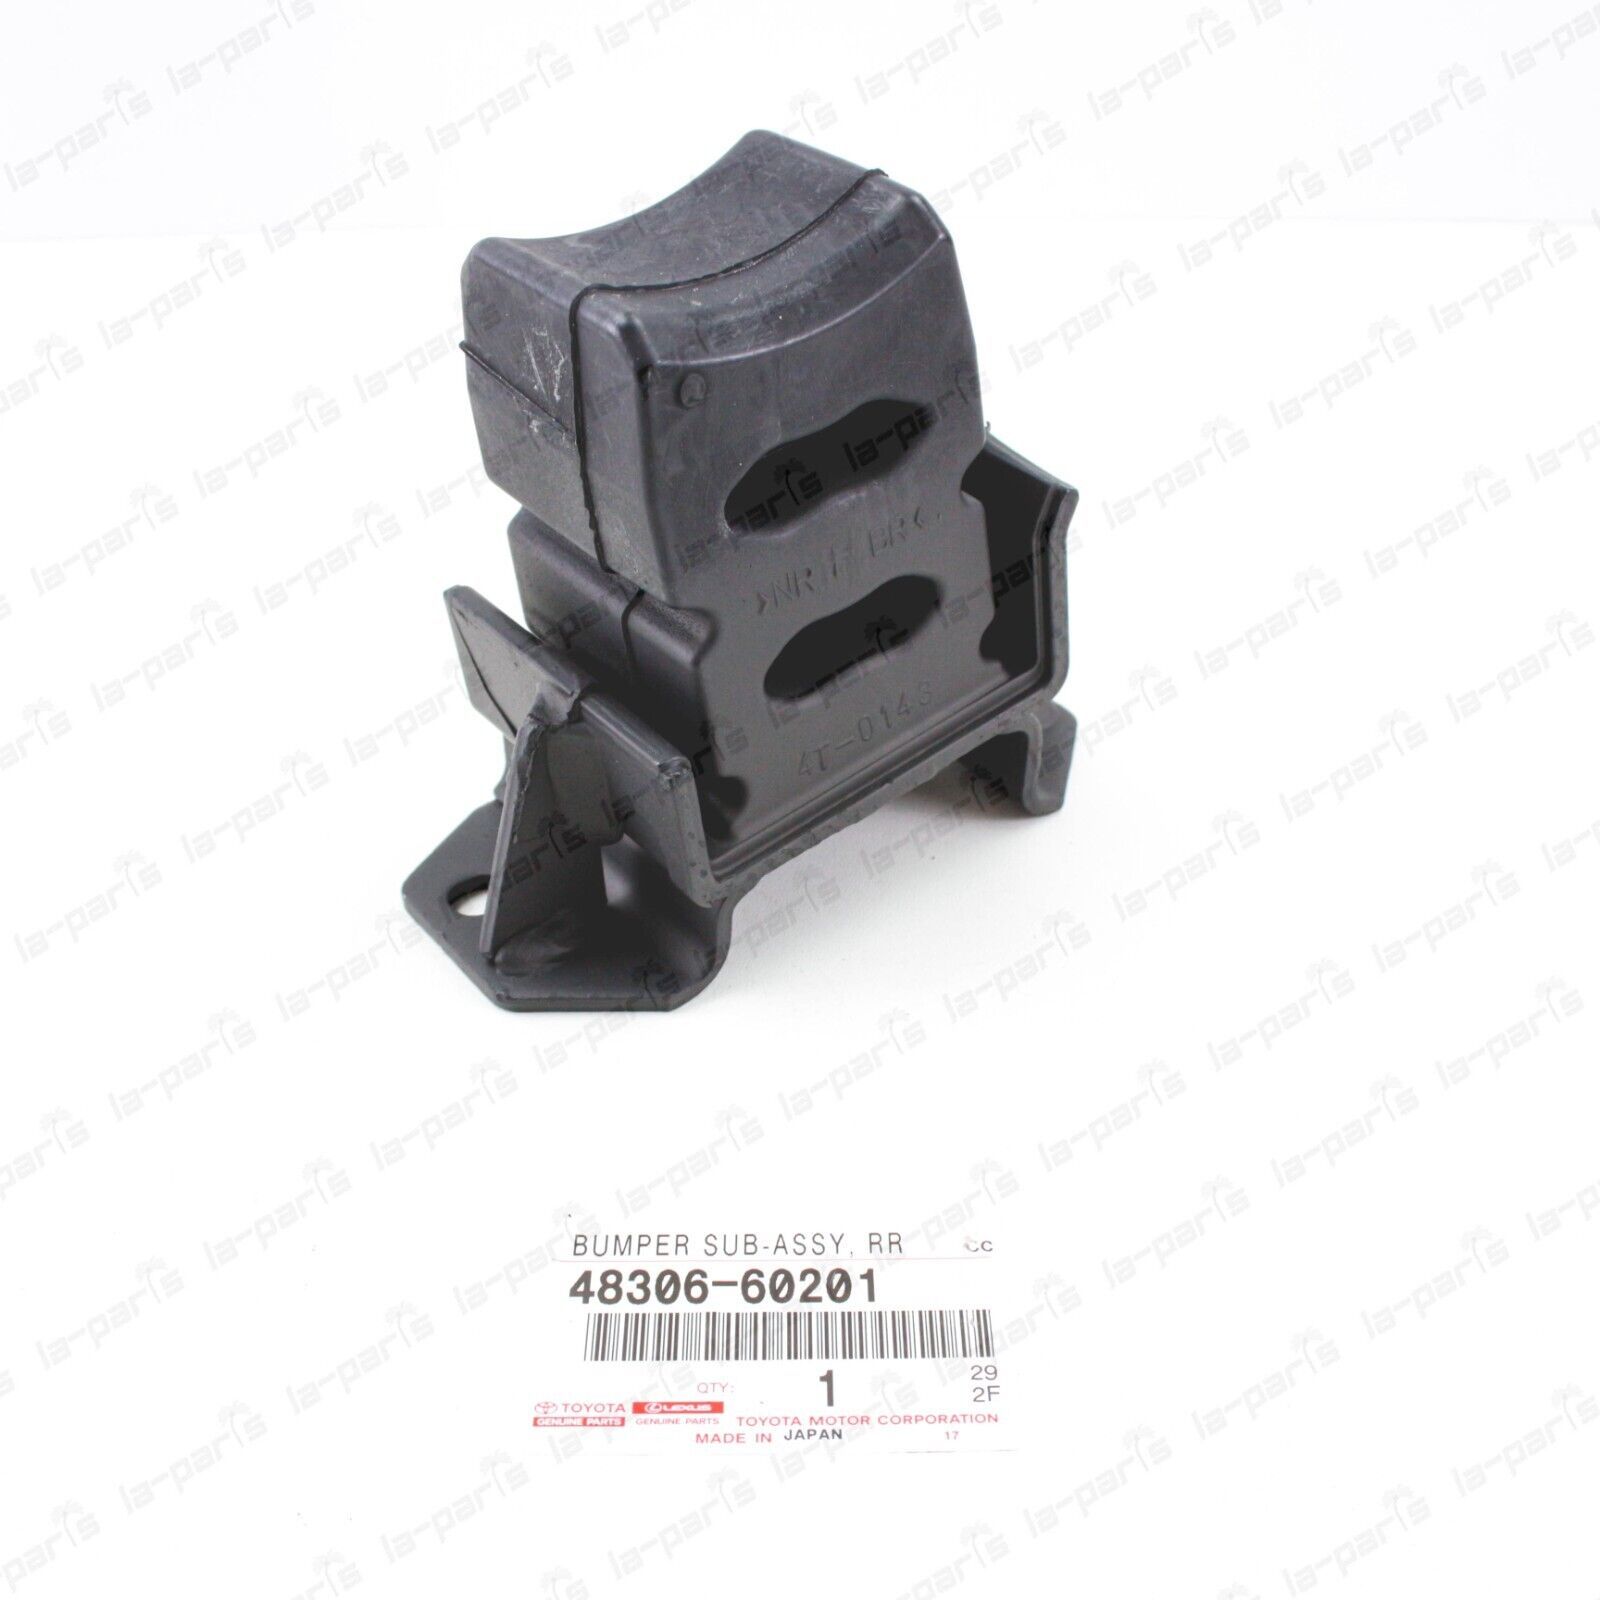 Primary image for Genuine Toyota 03-09 4Runner Gx470 Right Rear Axle Bump Stop Cushion 48306-60201